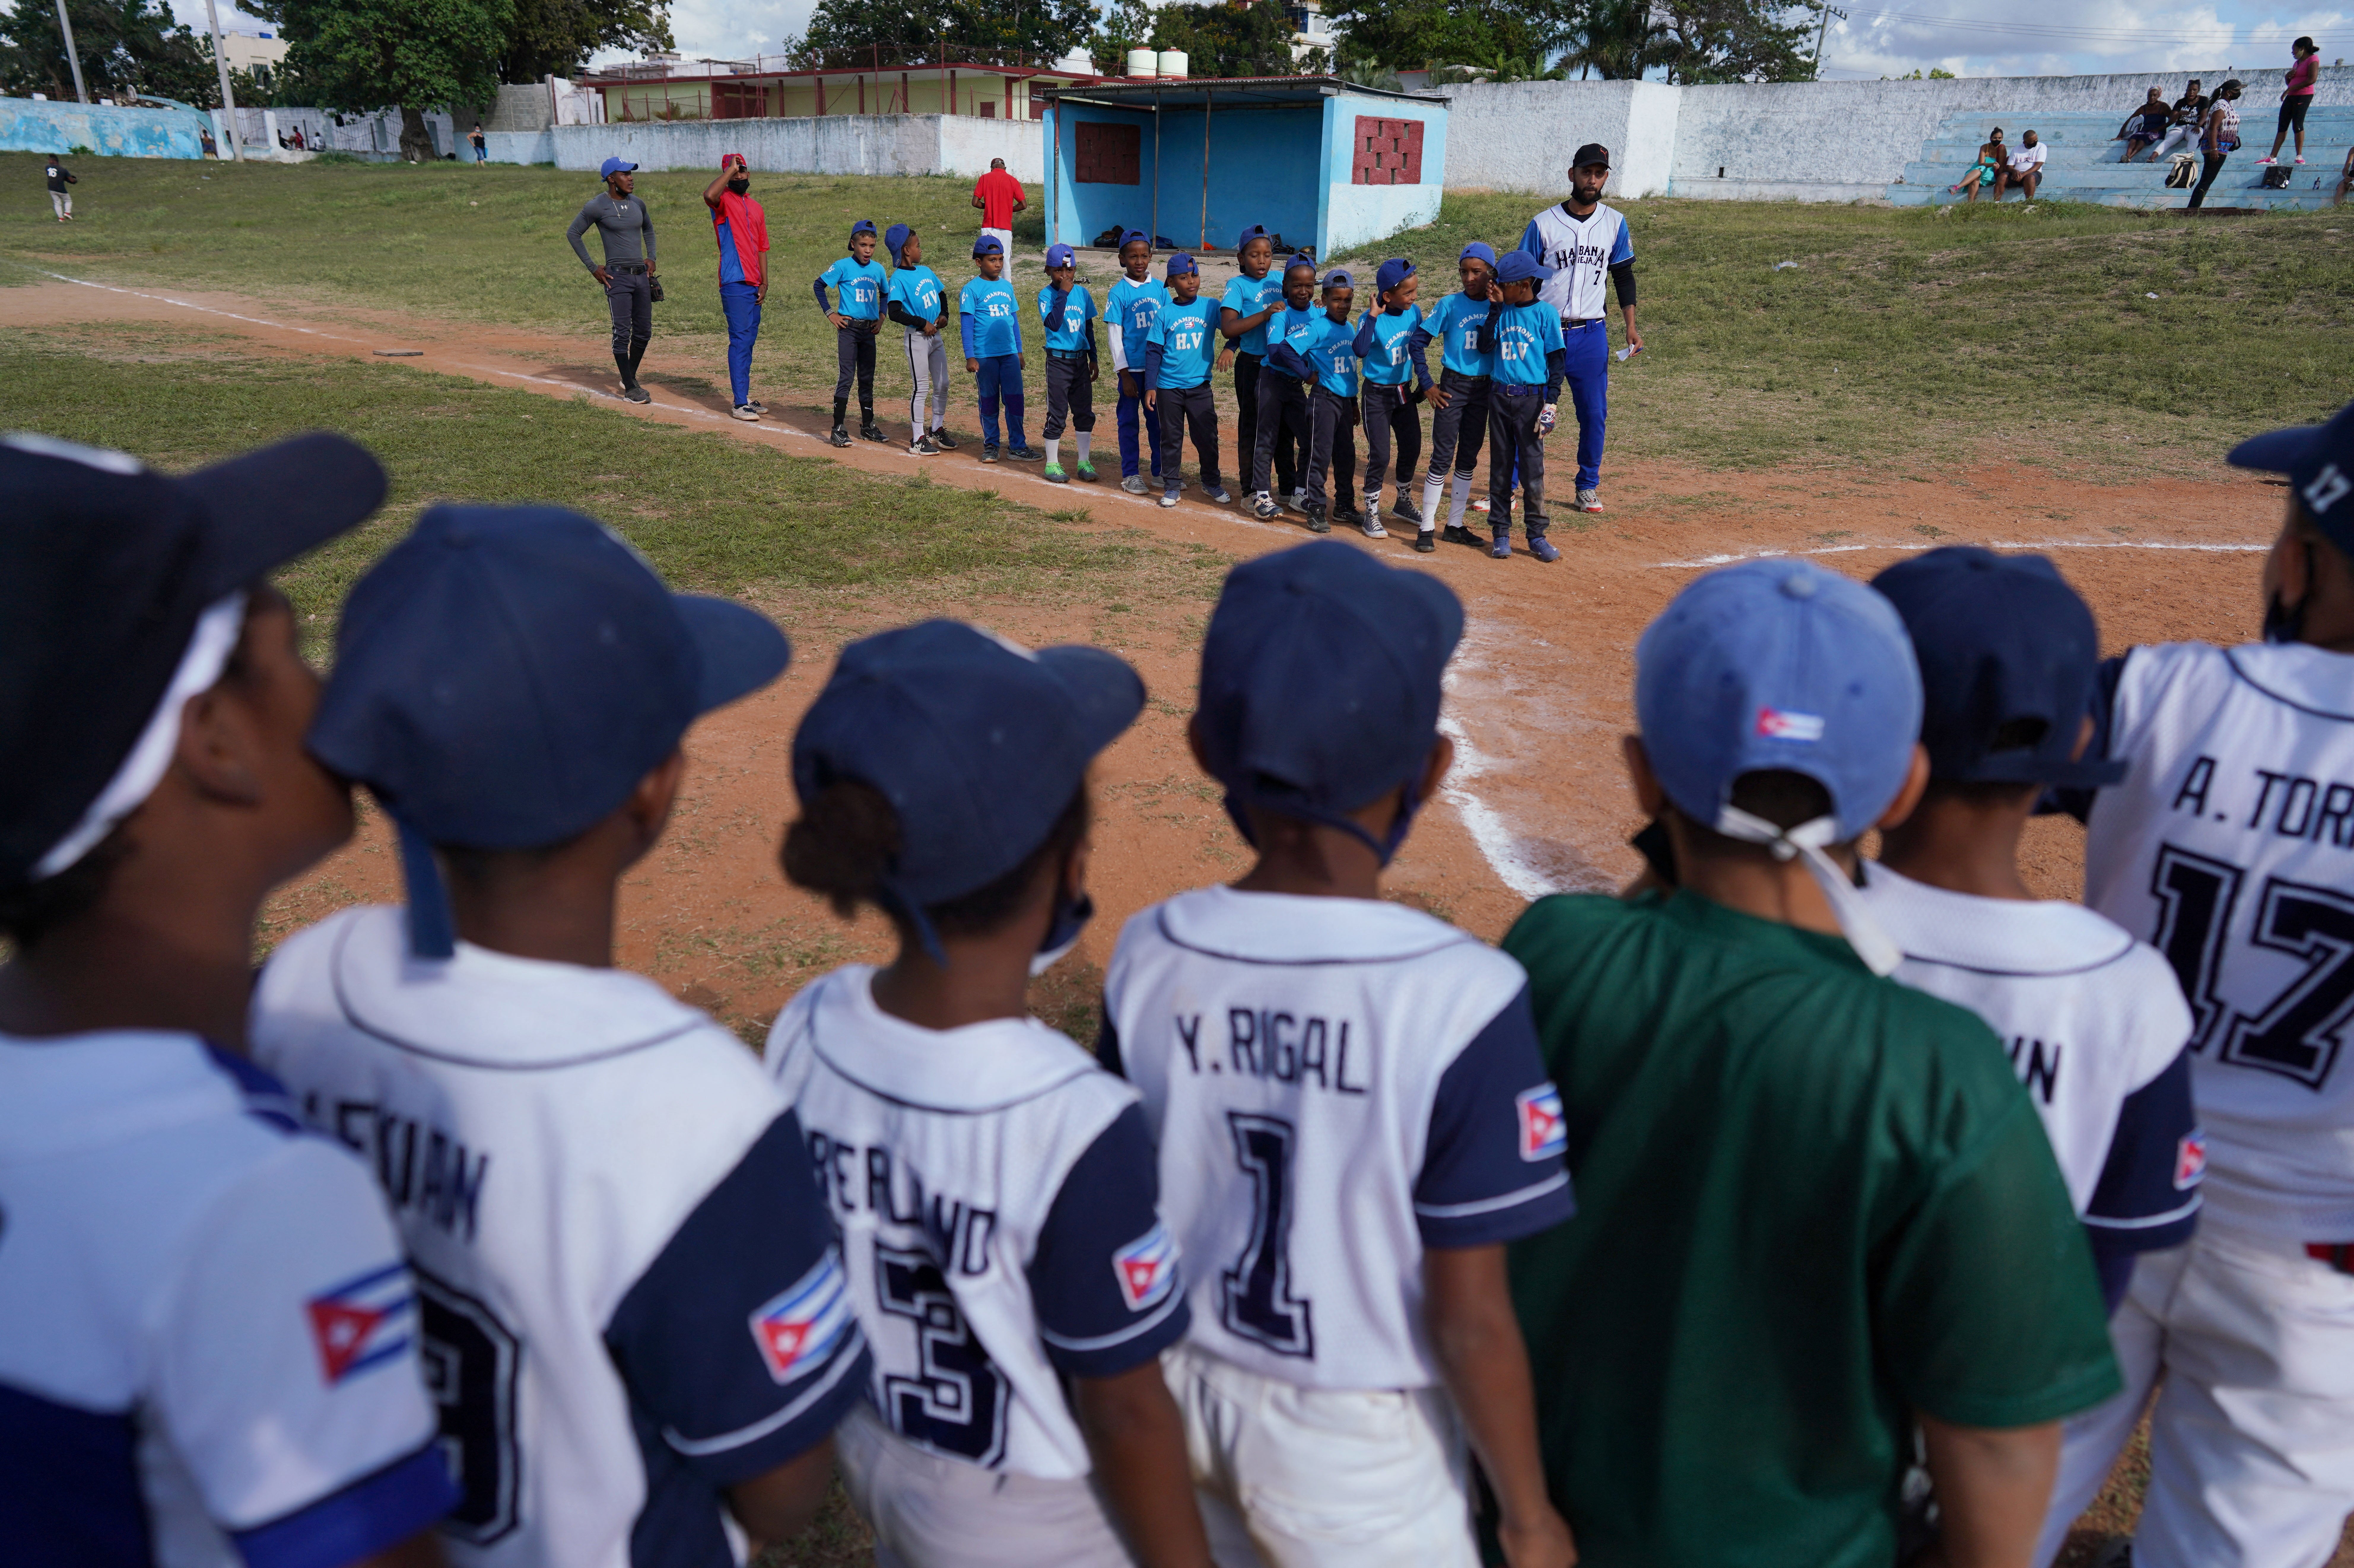 Children from the Downtown Havana baseball team prepare to high five the Champions team after a match in Havana